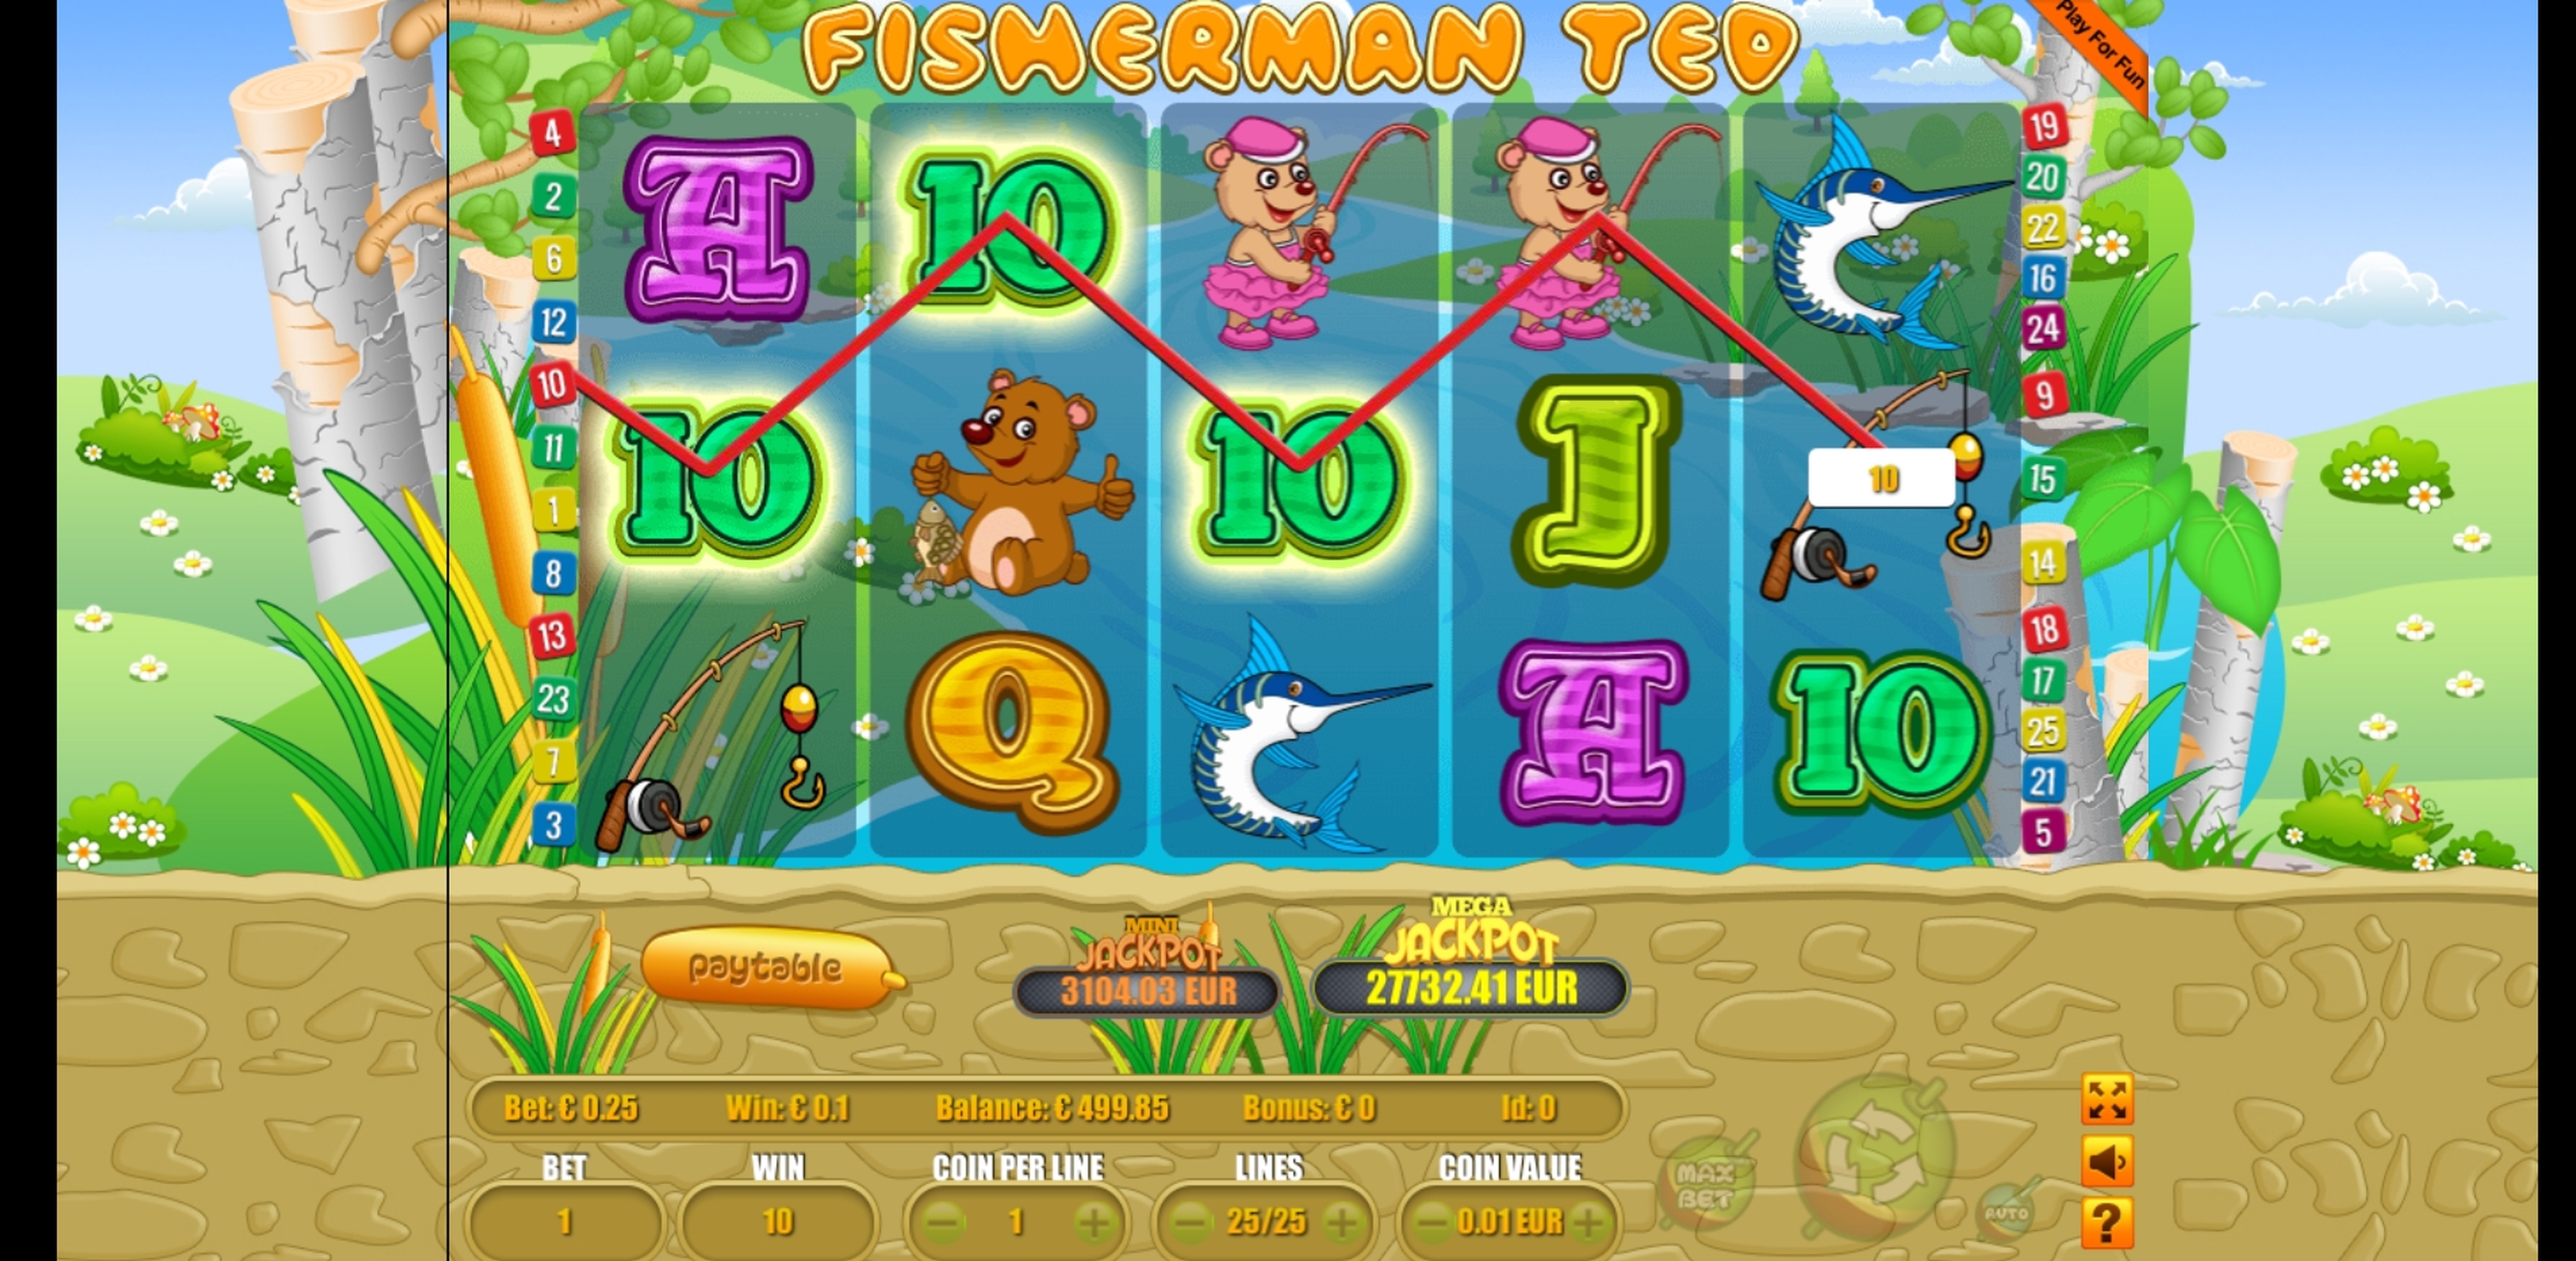 Win Money in Fisherman ted Free Slot Game by Portomaso Gaming